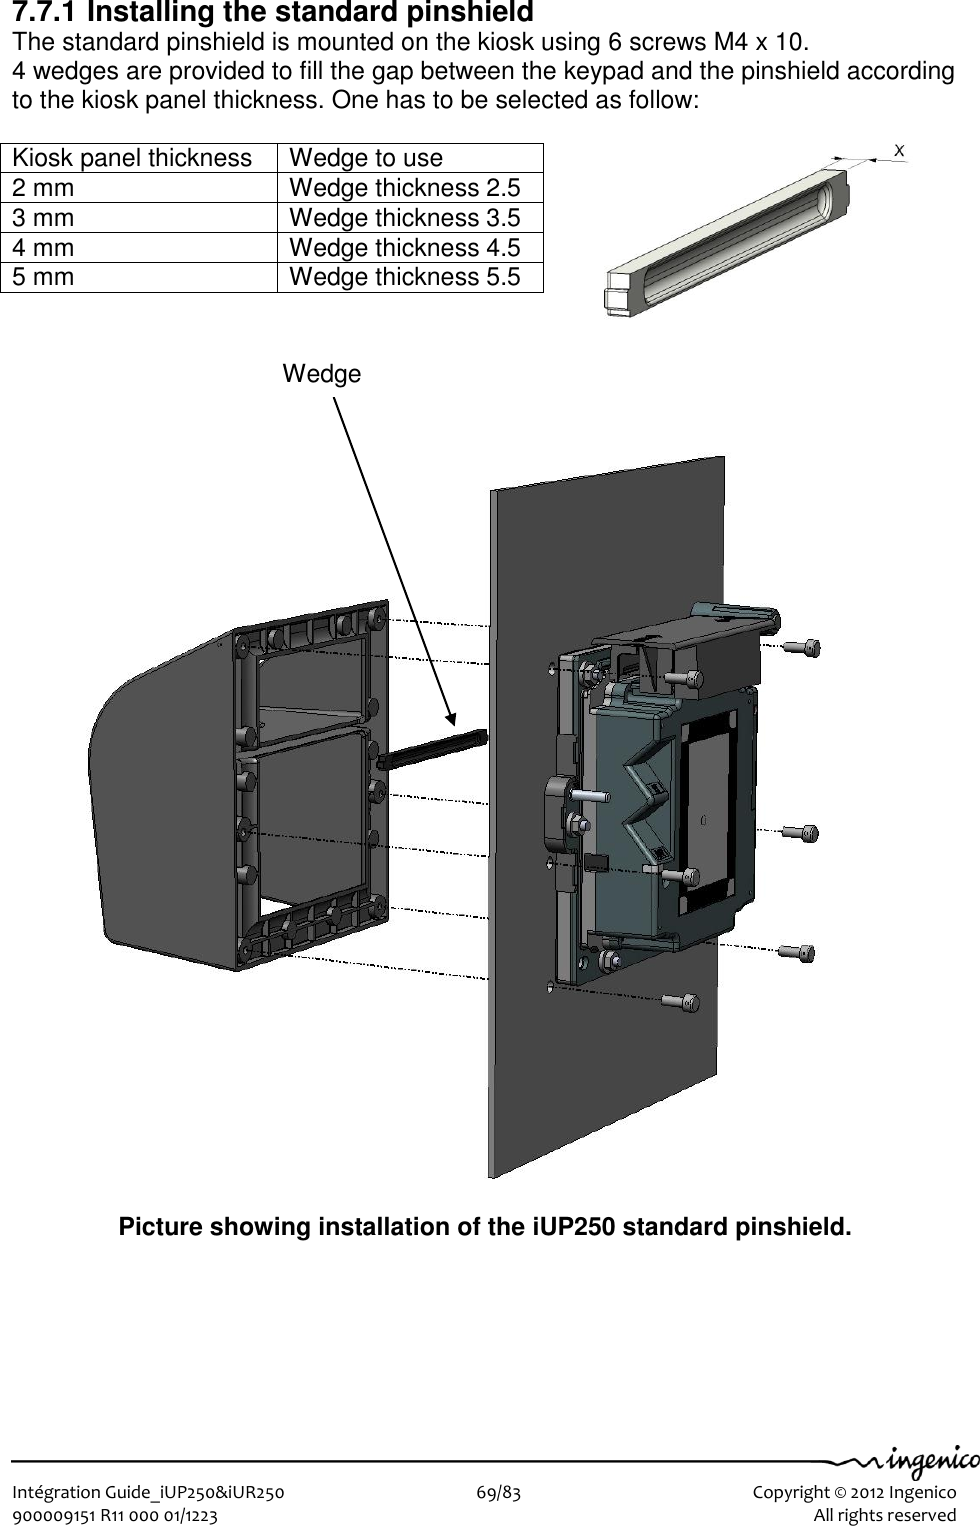   Intégration Guide_iUP250&amp;iUR250                        69/83    Copyright © 2012 Ingenico 900009151 R11 000 01/1223      All rights reserved   7.7.1 Installing the standard pinshield The standard pinshield is mounted on the kiosk using 6 screws M4 x 10. 4 wedges are provided to fill the gap between the keypad and the pinshield according to the kiosk panel thickness. One has to be selected as follow:  Kiosk panel thickness Wedge to use 2 mm Wedge thickness 2.5 3 mm Wedge thickness 3.5 4 mm Wedge thickness 4.5 5 mm Wedge thickness 5.5                                 Picture showing installation of the iUP250 standard pinshield. Wedge 